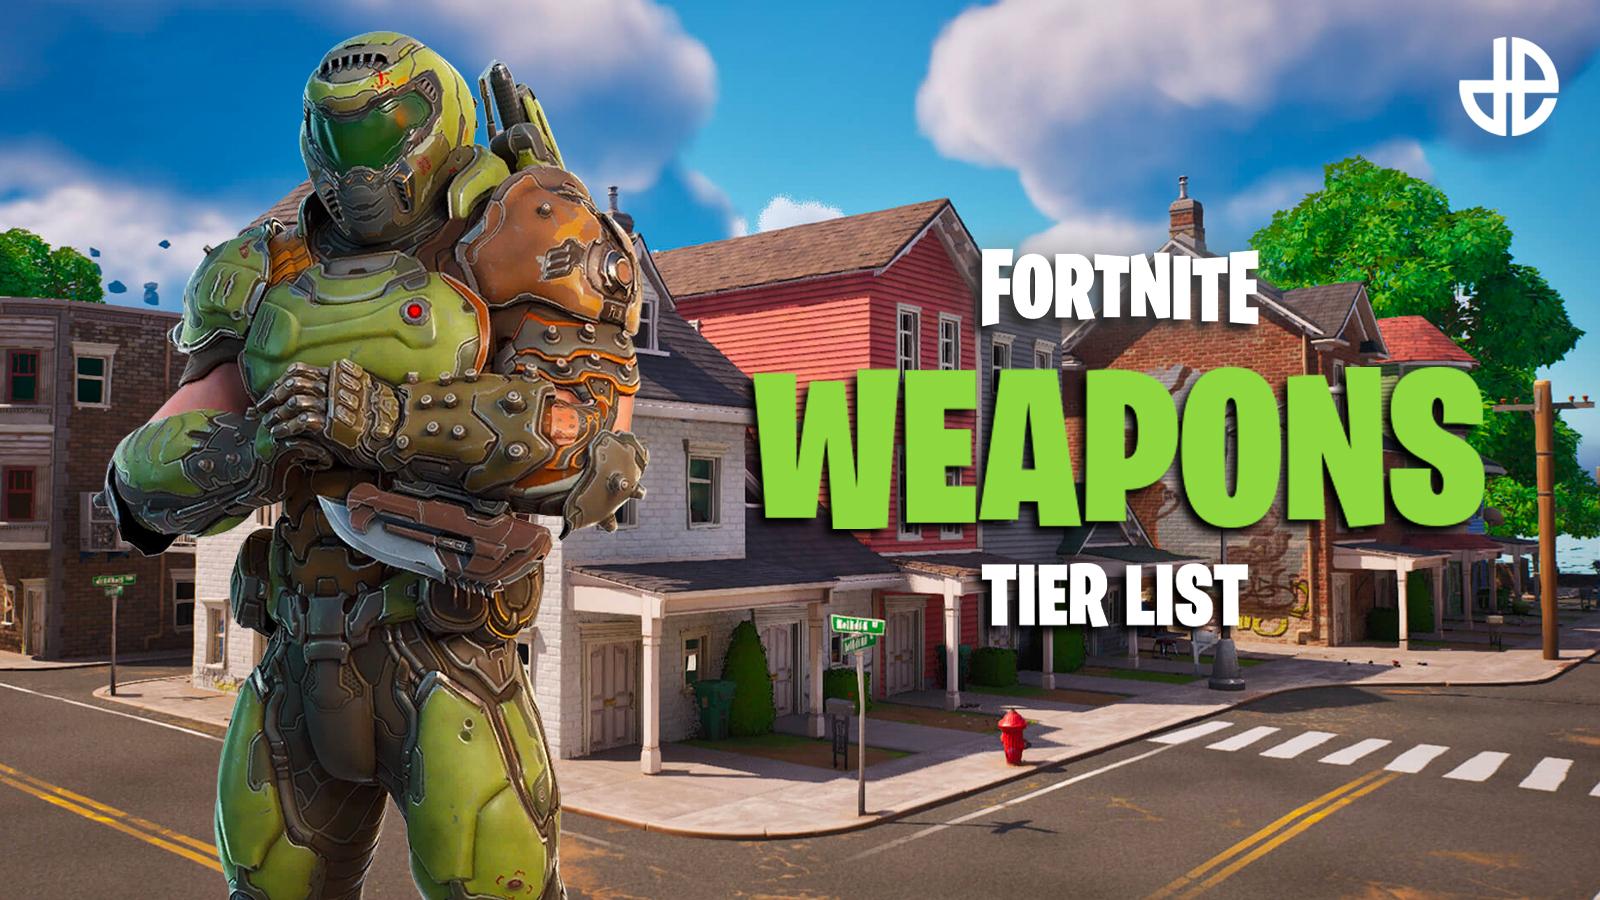 A Fortnite character next to text reading 'best fortnite weapons tier list'